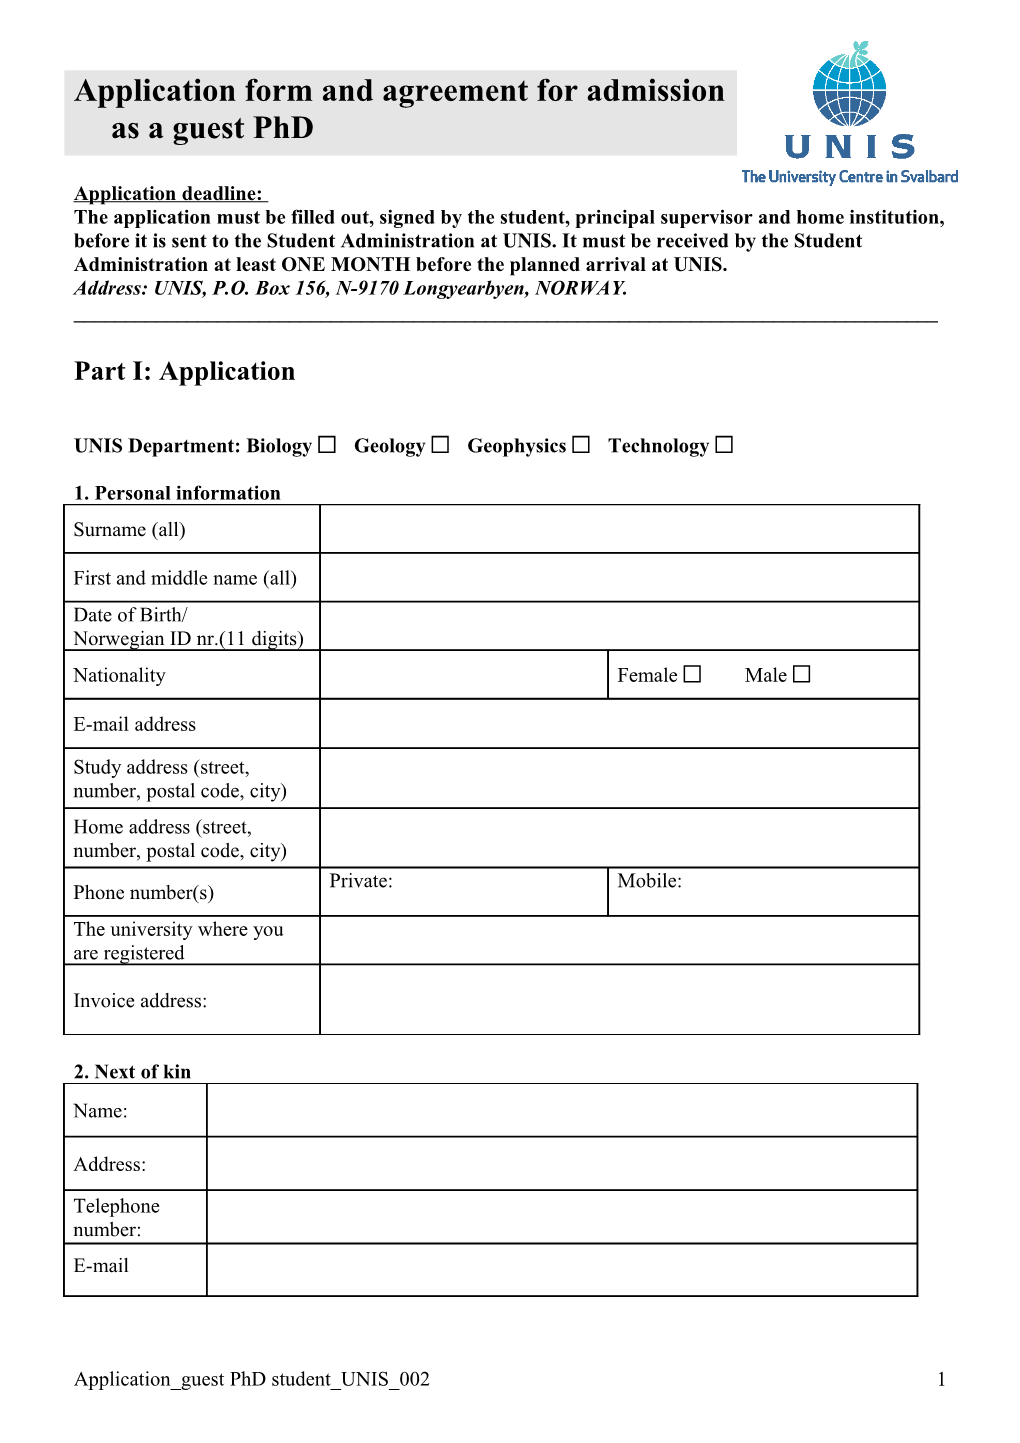 Application for Doctorate Students